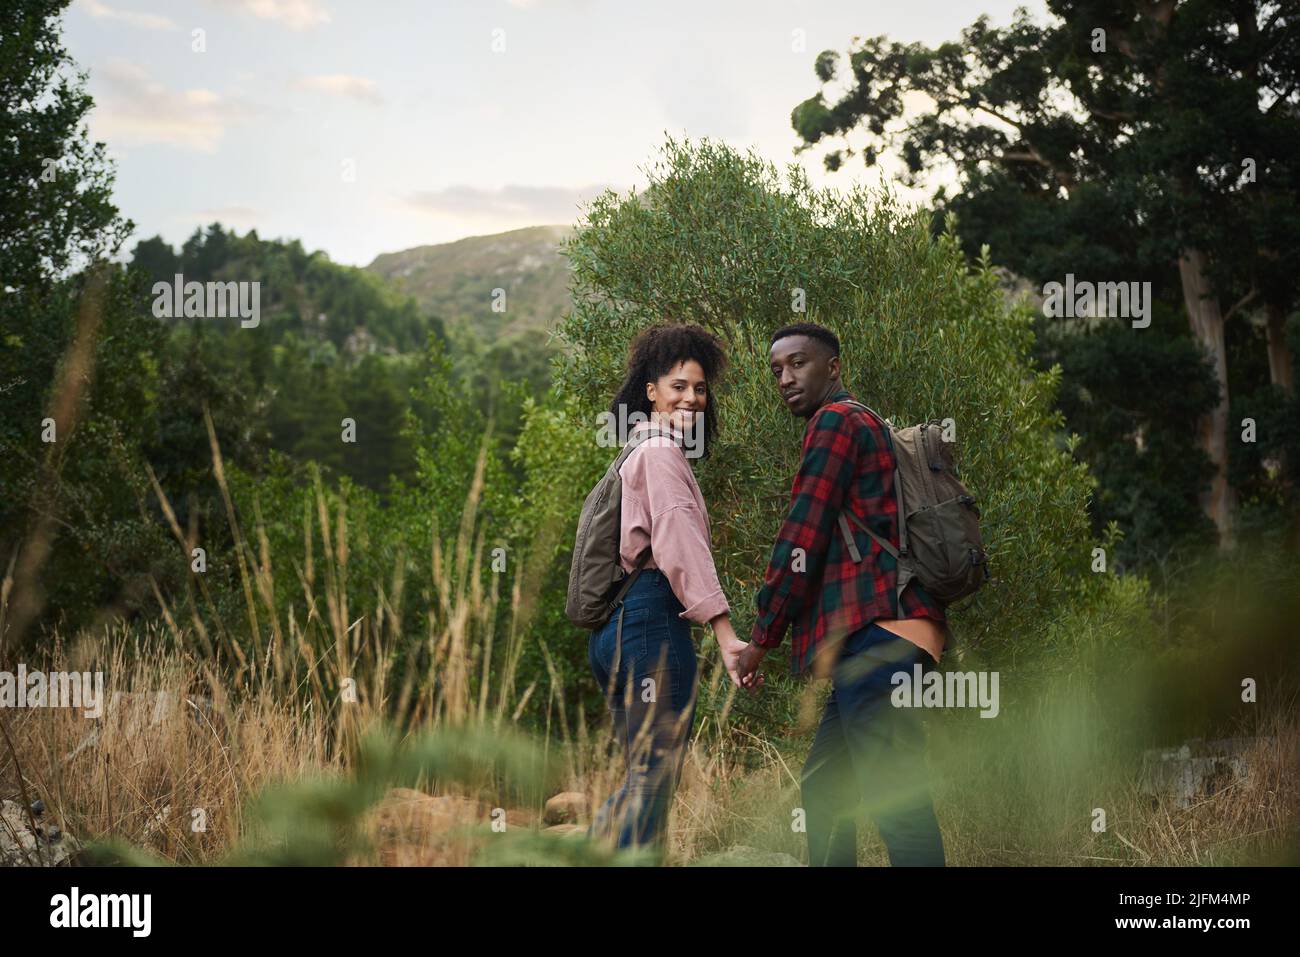 Portrait of a smiling young multiethnic couple hiking hand in hand together along a path in some rugged hills in the summertime Stock Photo